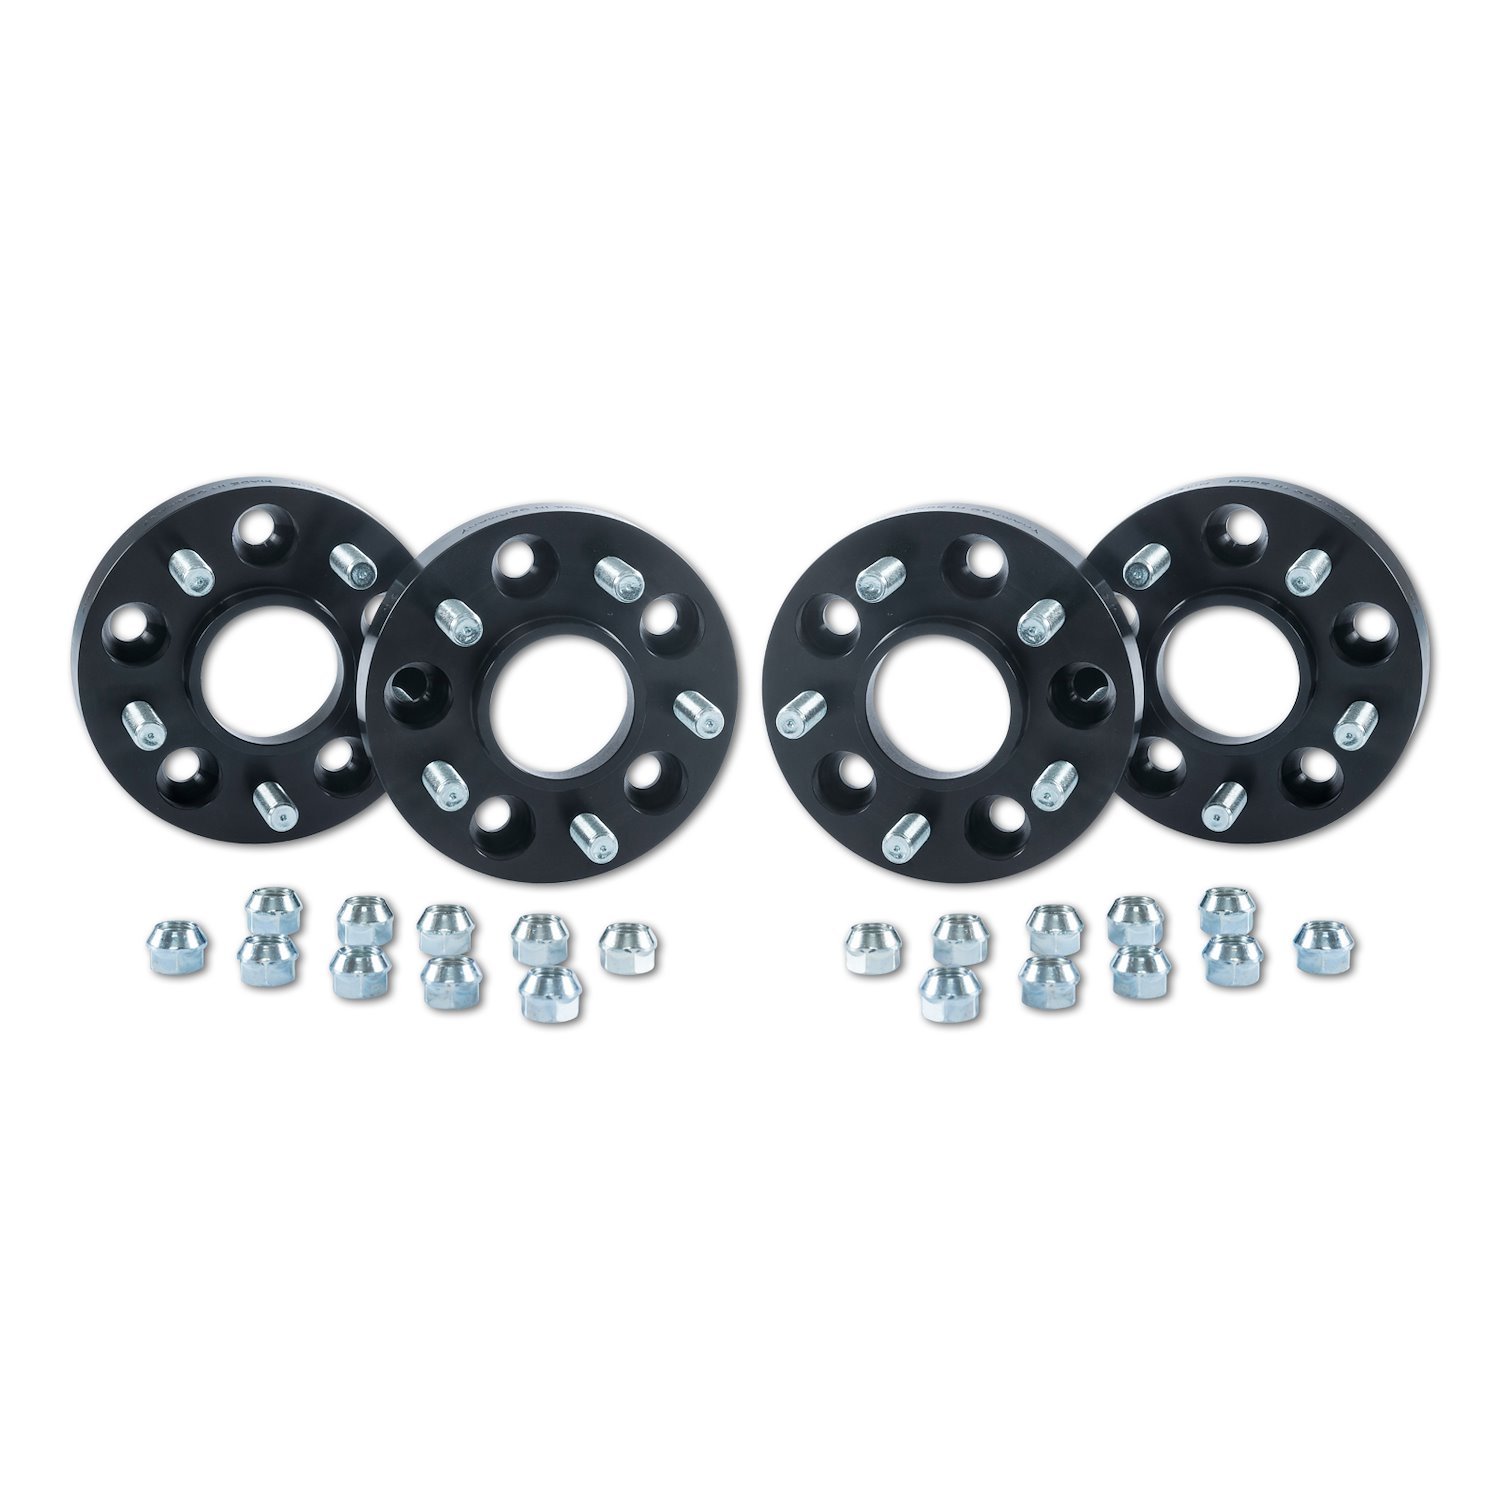 56012011 ST Easy Fit Wheel Spacer Kit for Ford Mustang (S550)